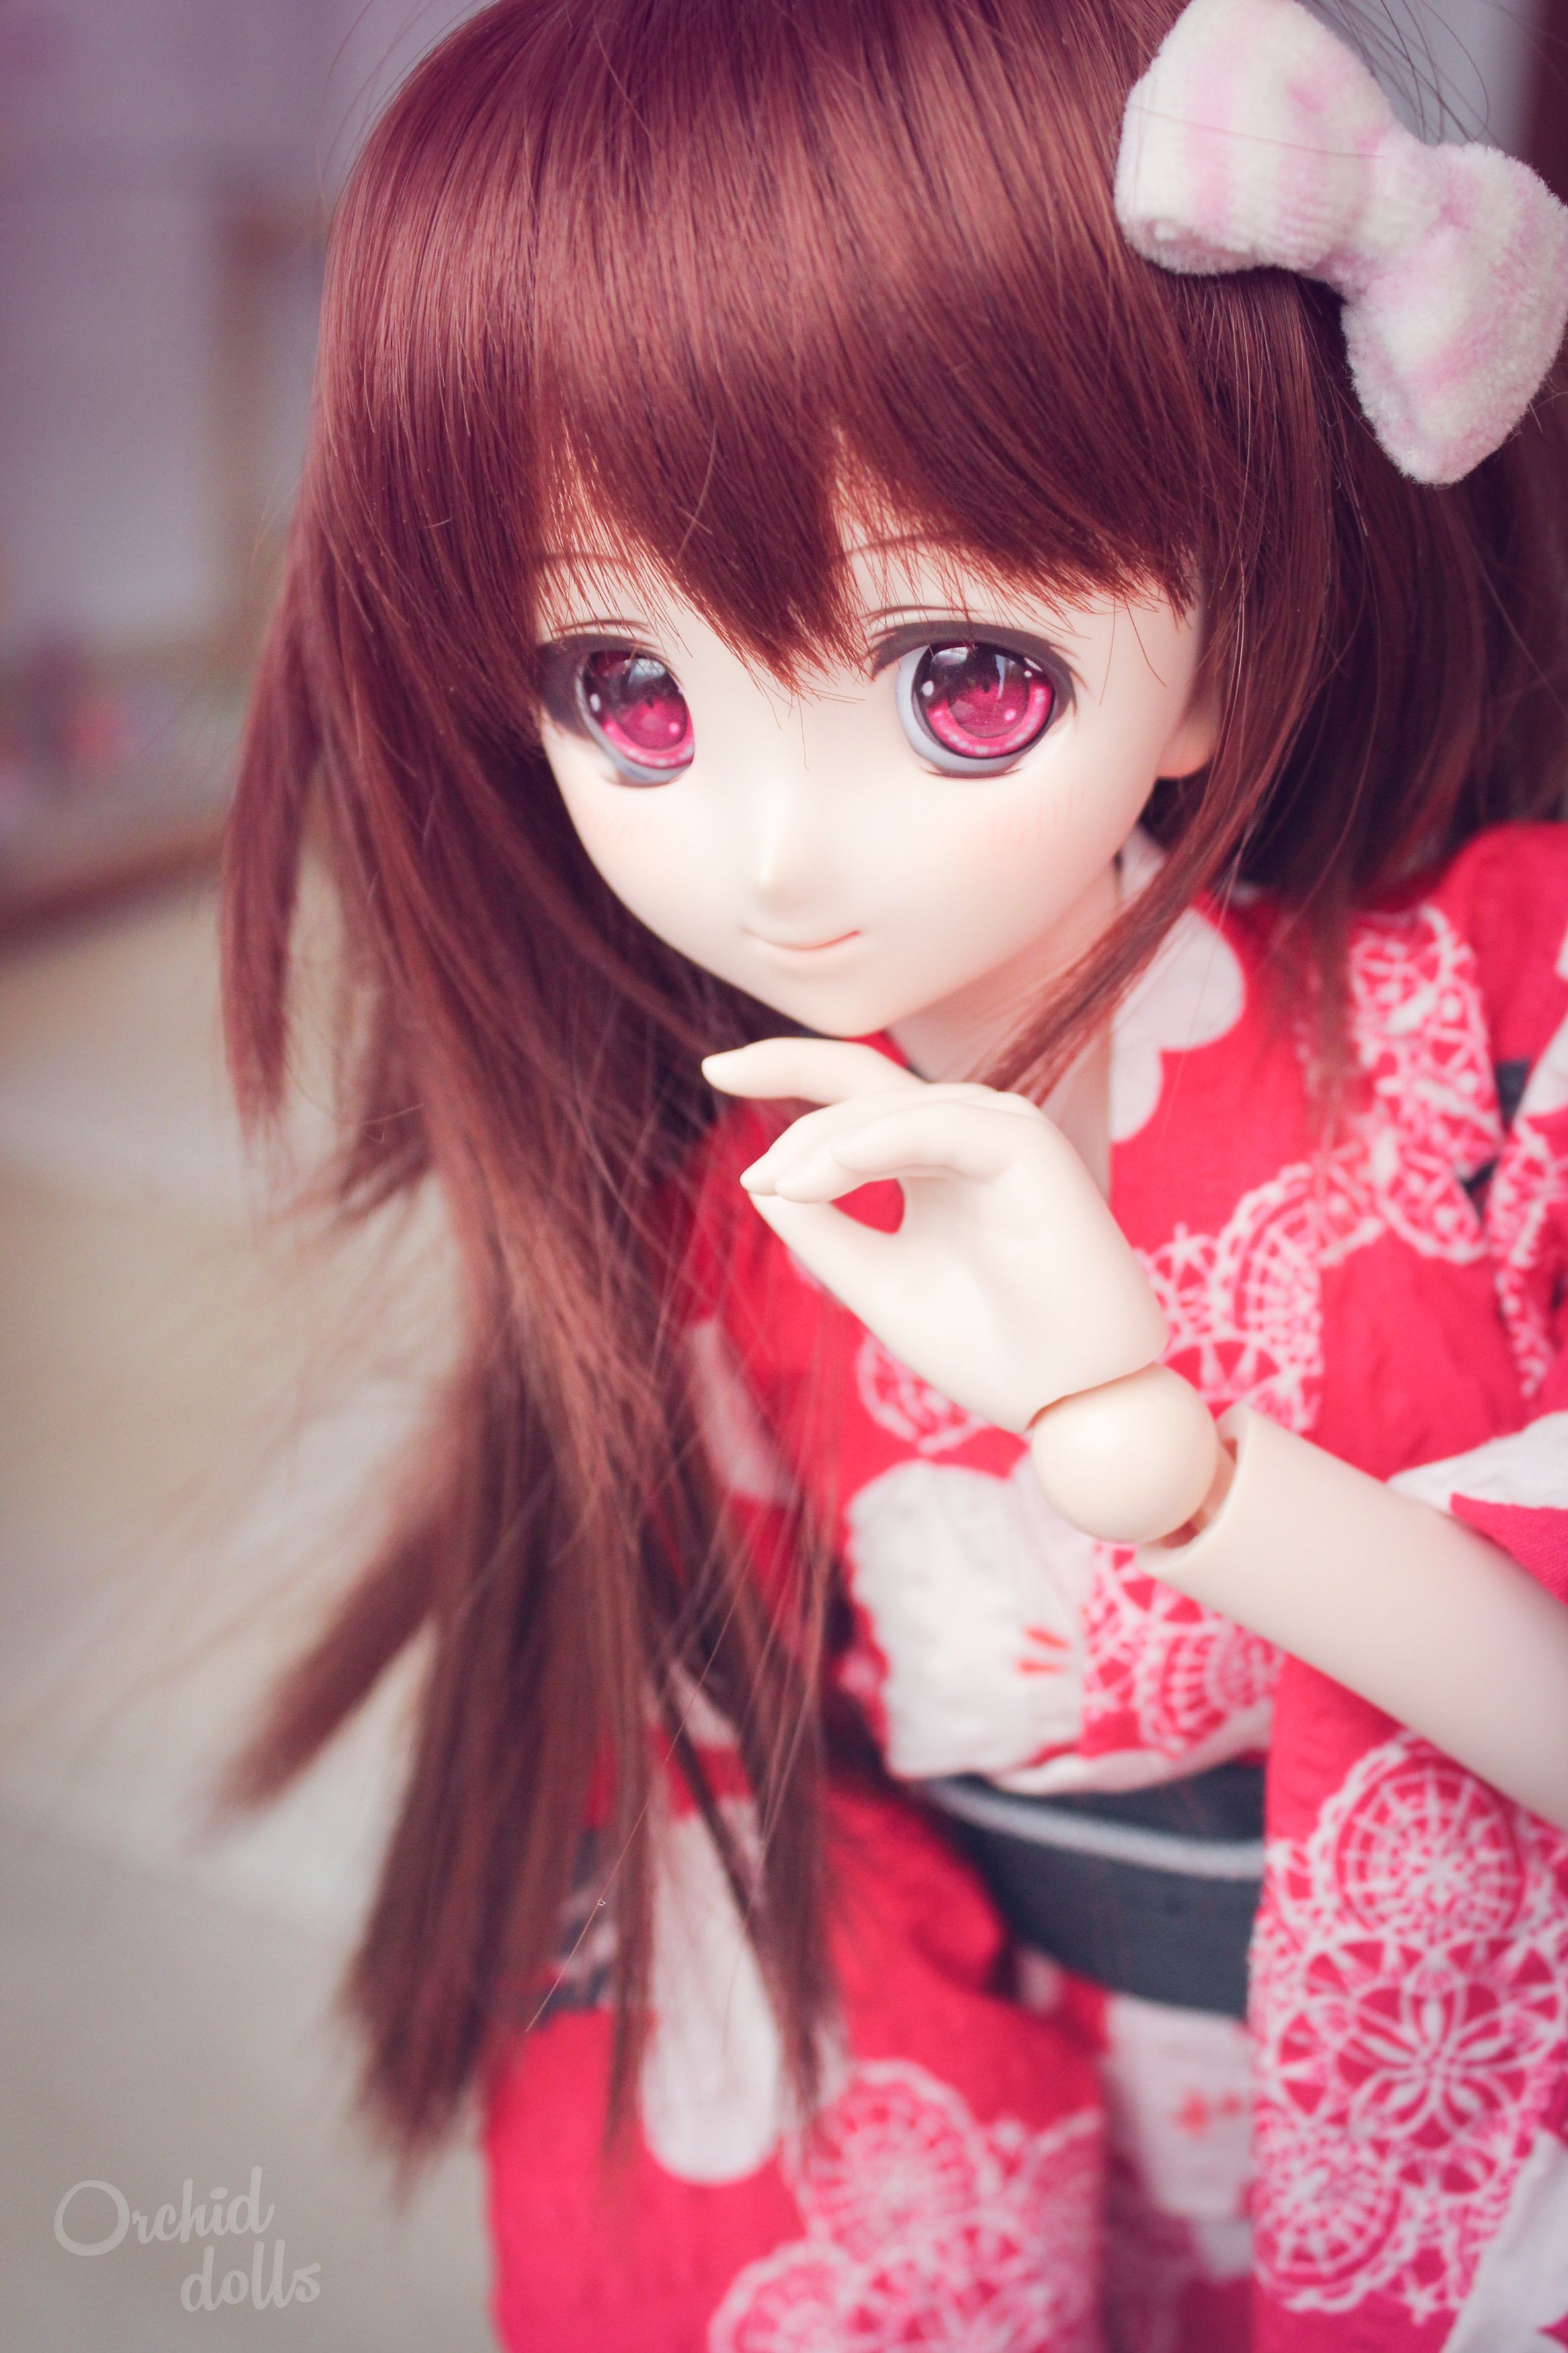 Millhe (Dollfie Dream Sister Millhiore) 2014 09 24 Catch Me If You Can. Cute Girl HD Wallpaper, Anime Dolls, Kawaii Doll